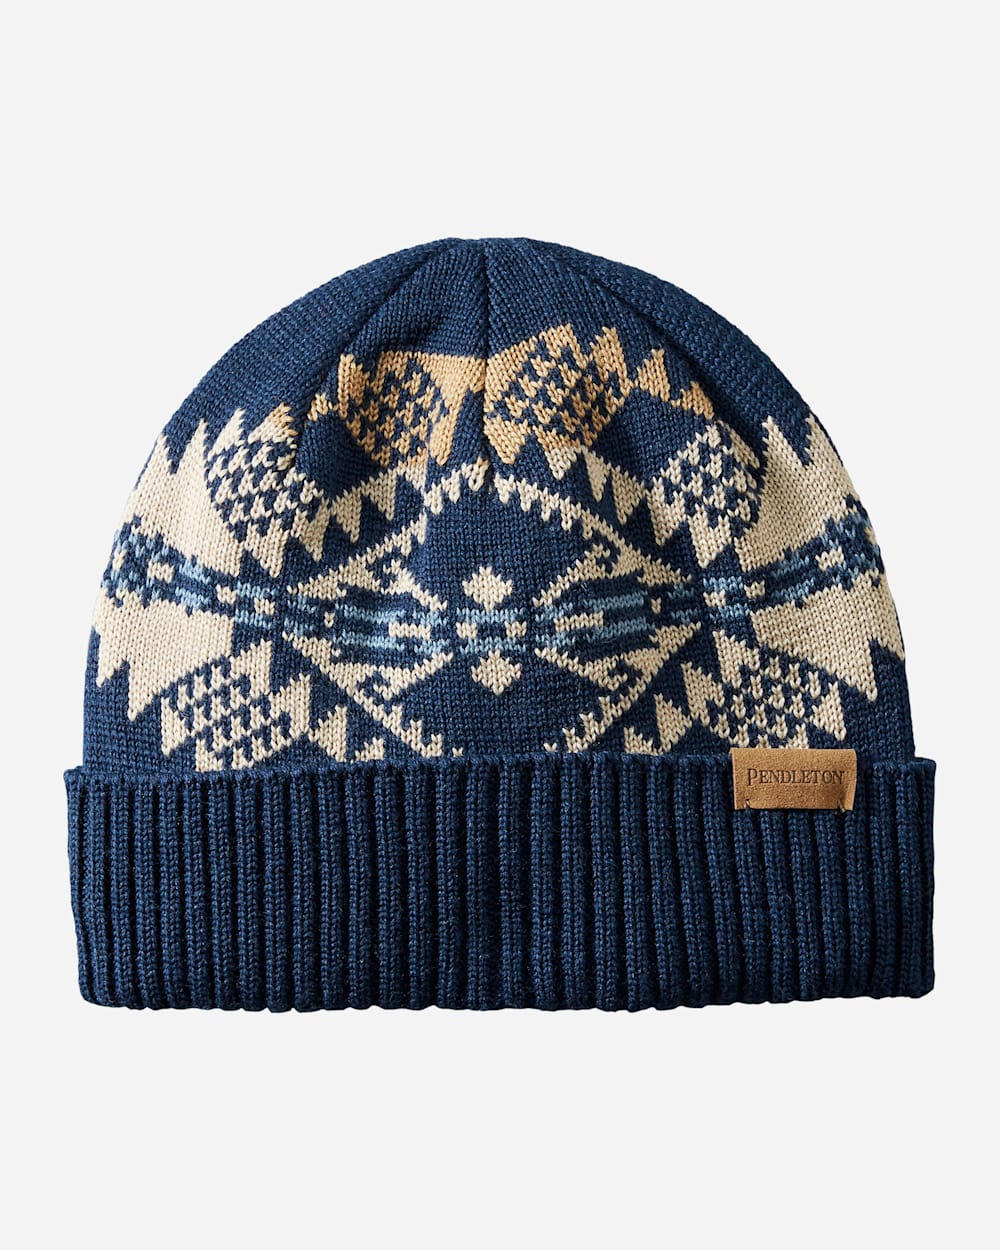 KNIT HAT IN JOURNEY WEST NAVY image number 1